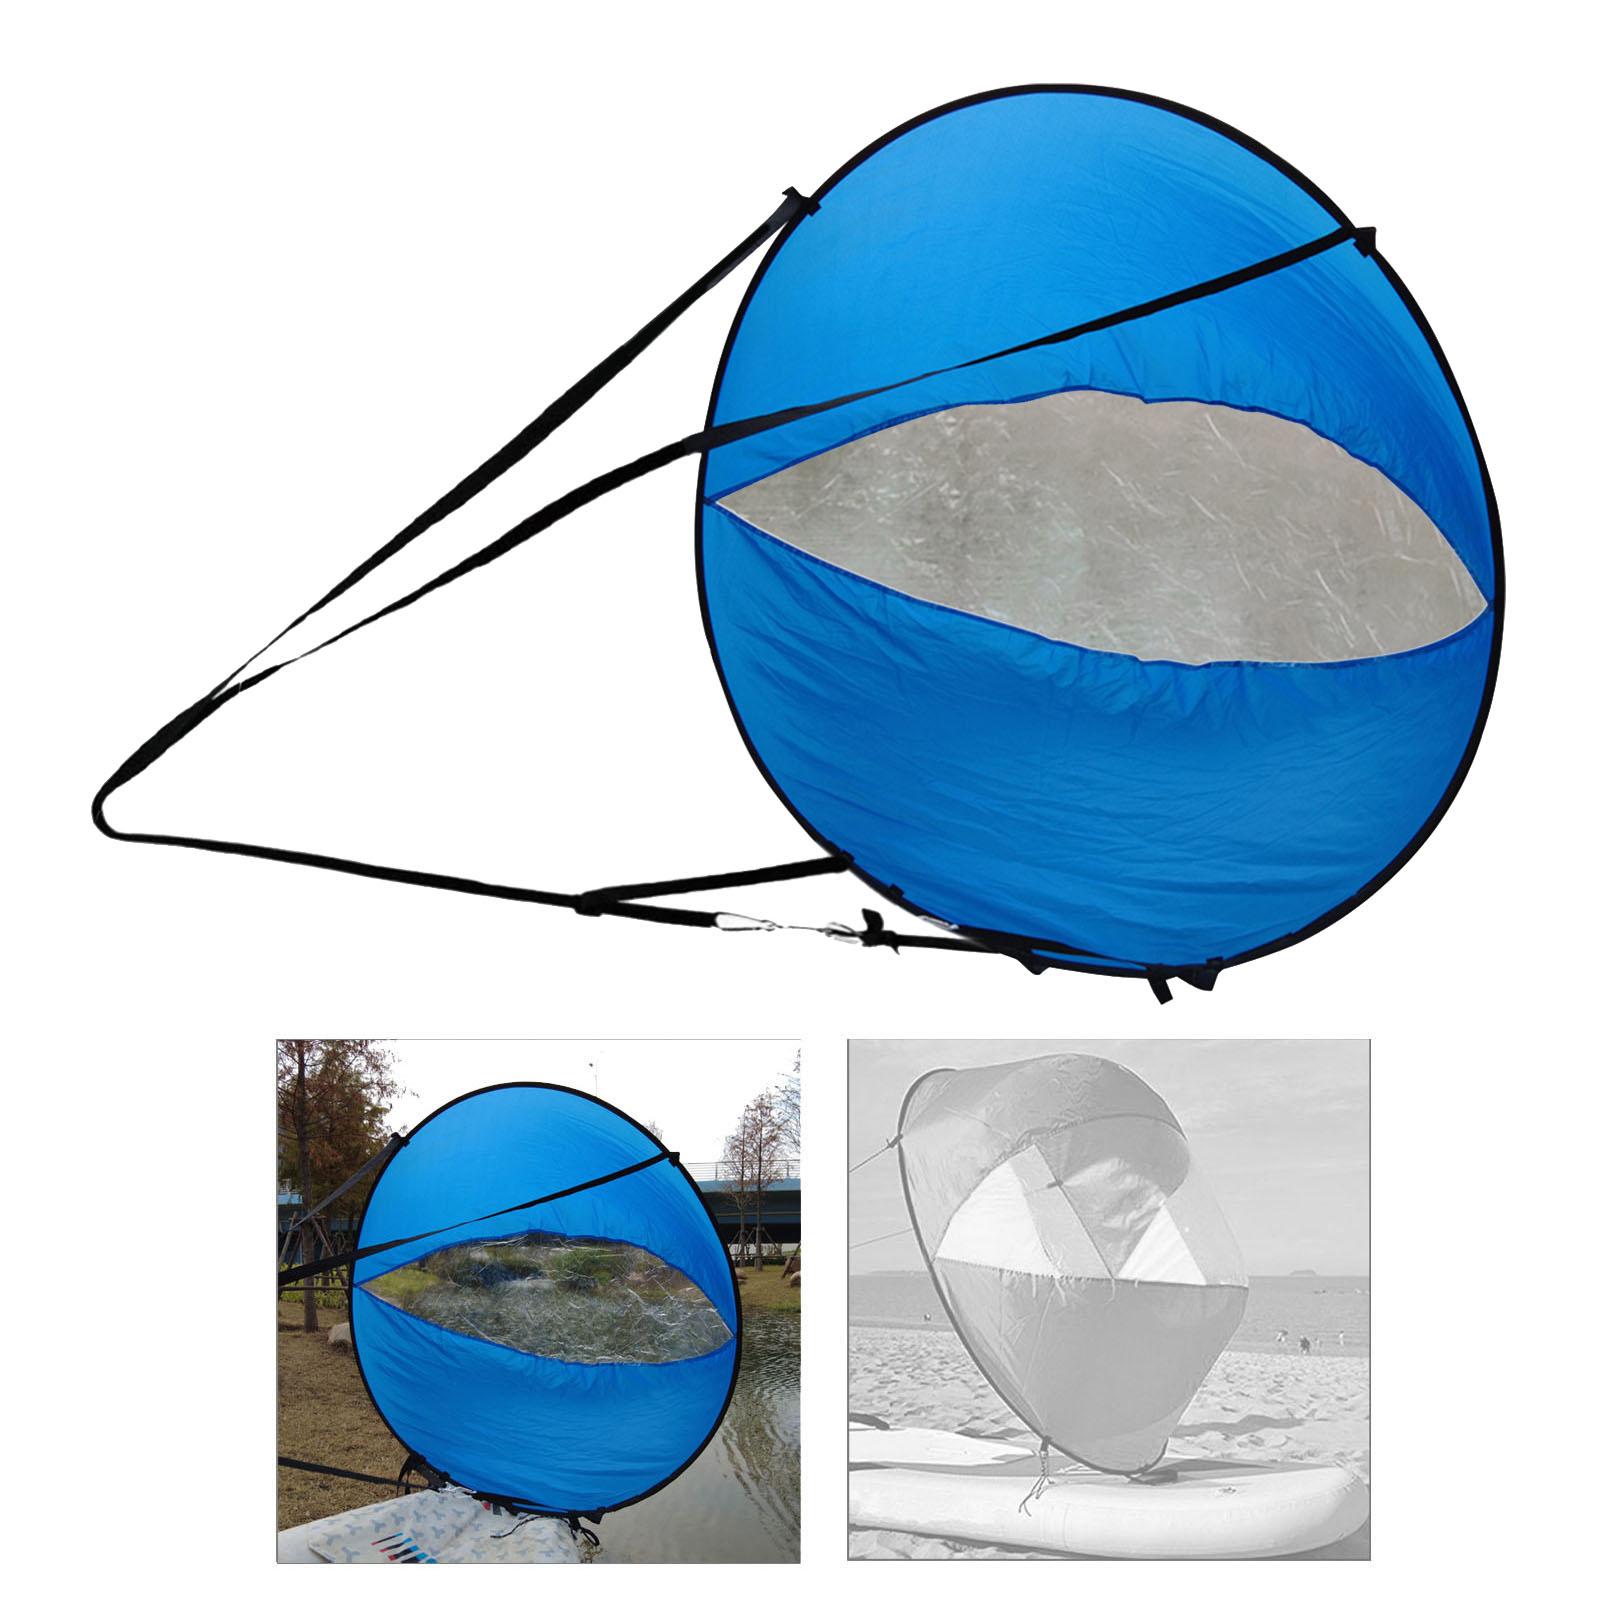 Downwind Wind Sail Kit 42" Popup Kayak Wind Sail for Inflatable Boats Canoes blue